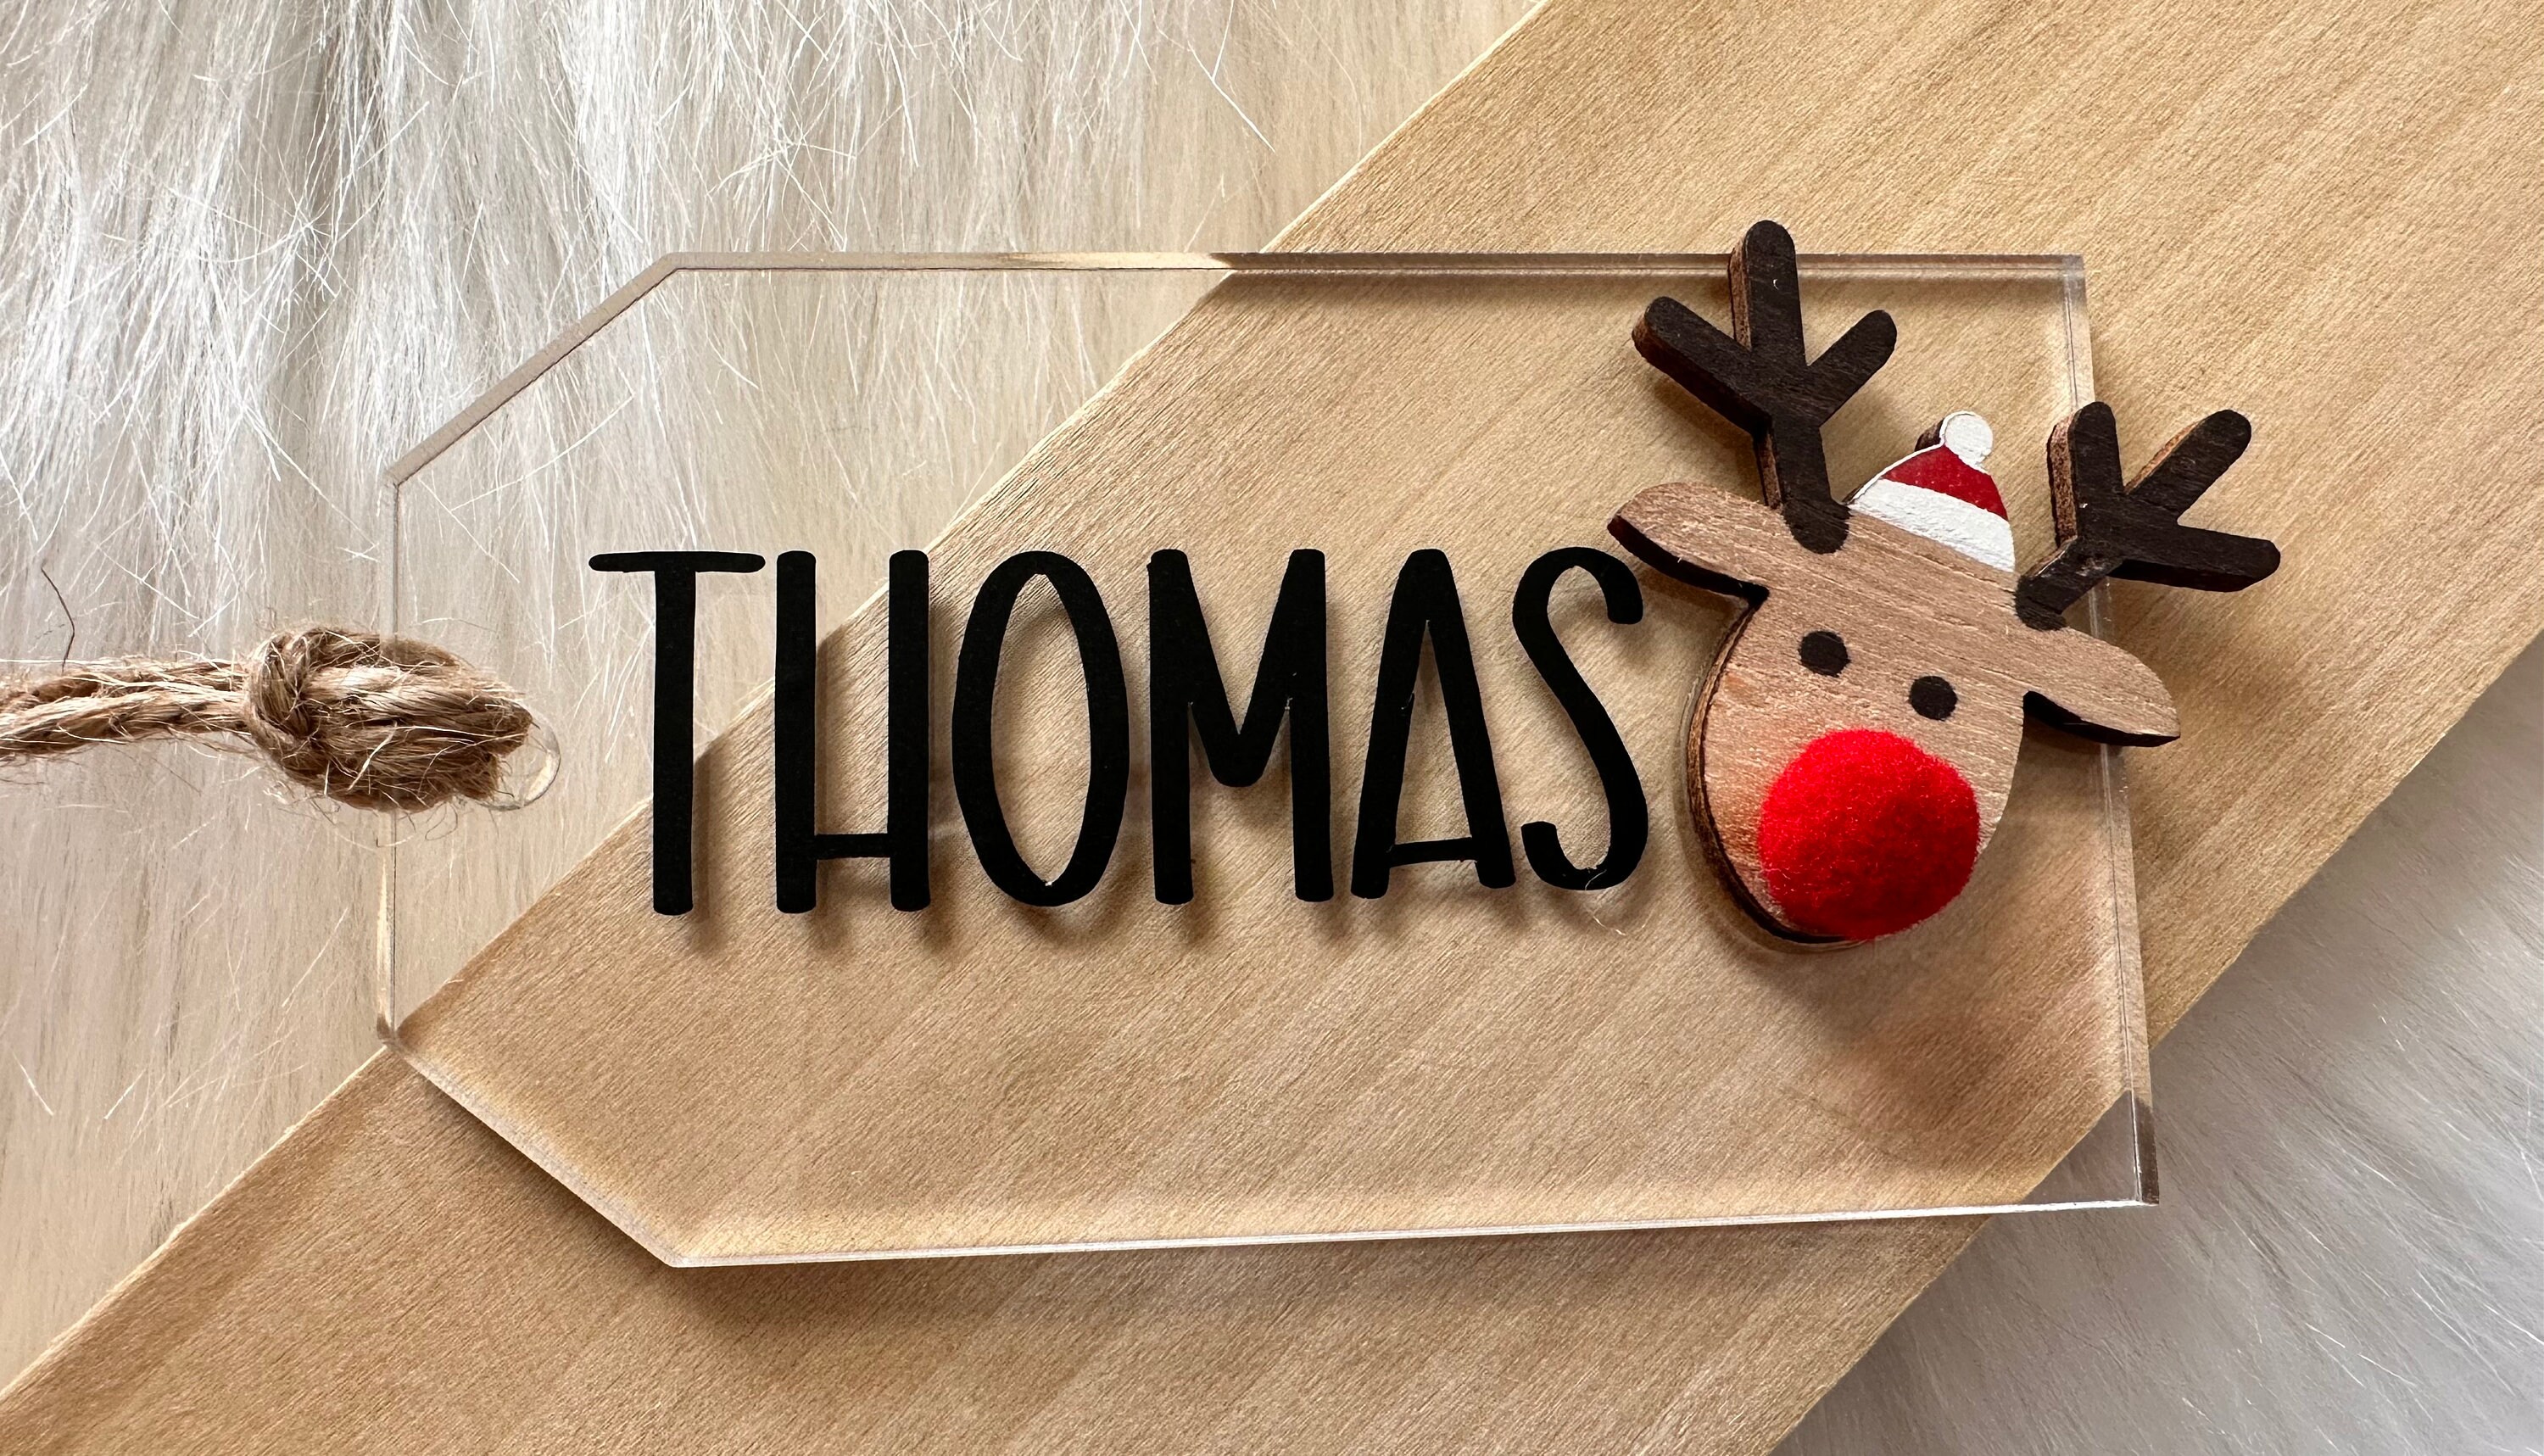 Stocking Name Tags in Acrylic and Wood for Christmas, Custom Name Tags for  Gifts and Holiday Place Settings - 3138